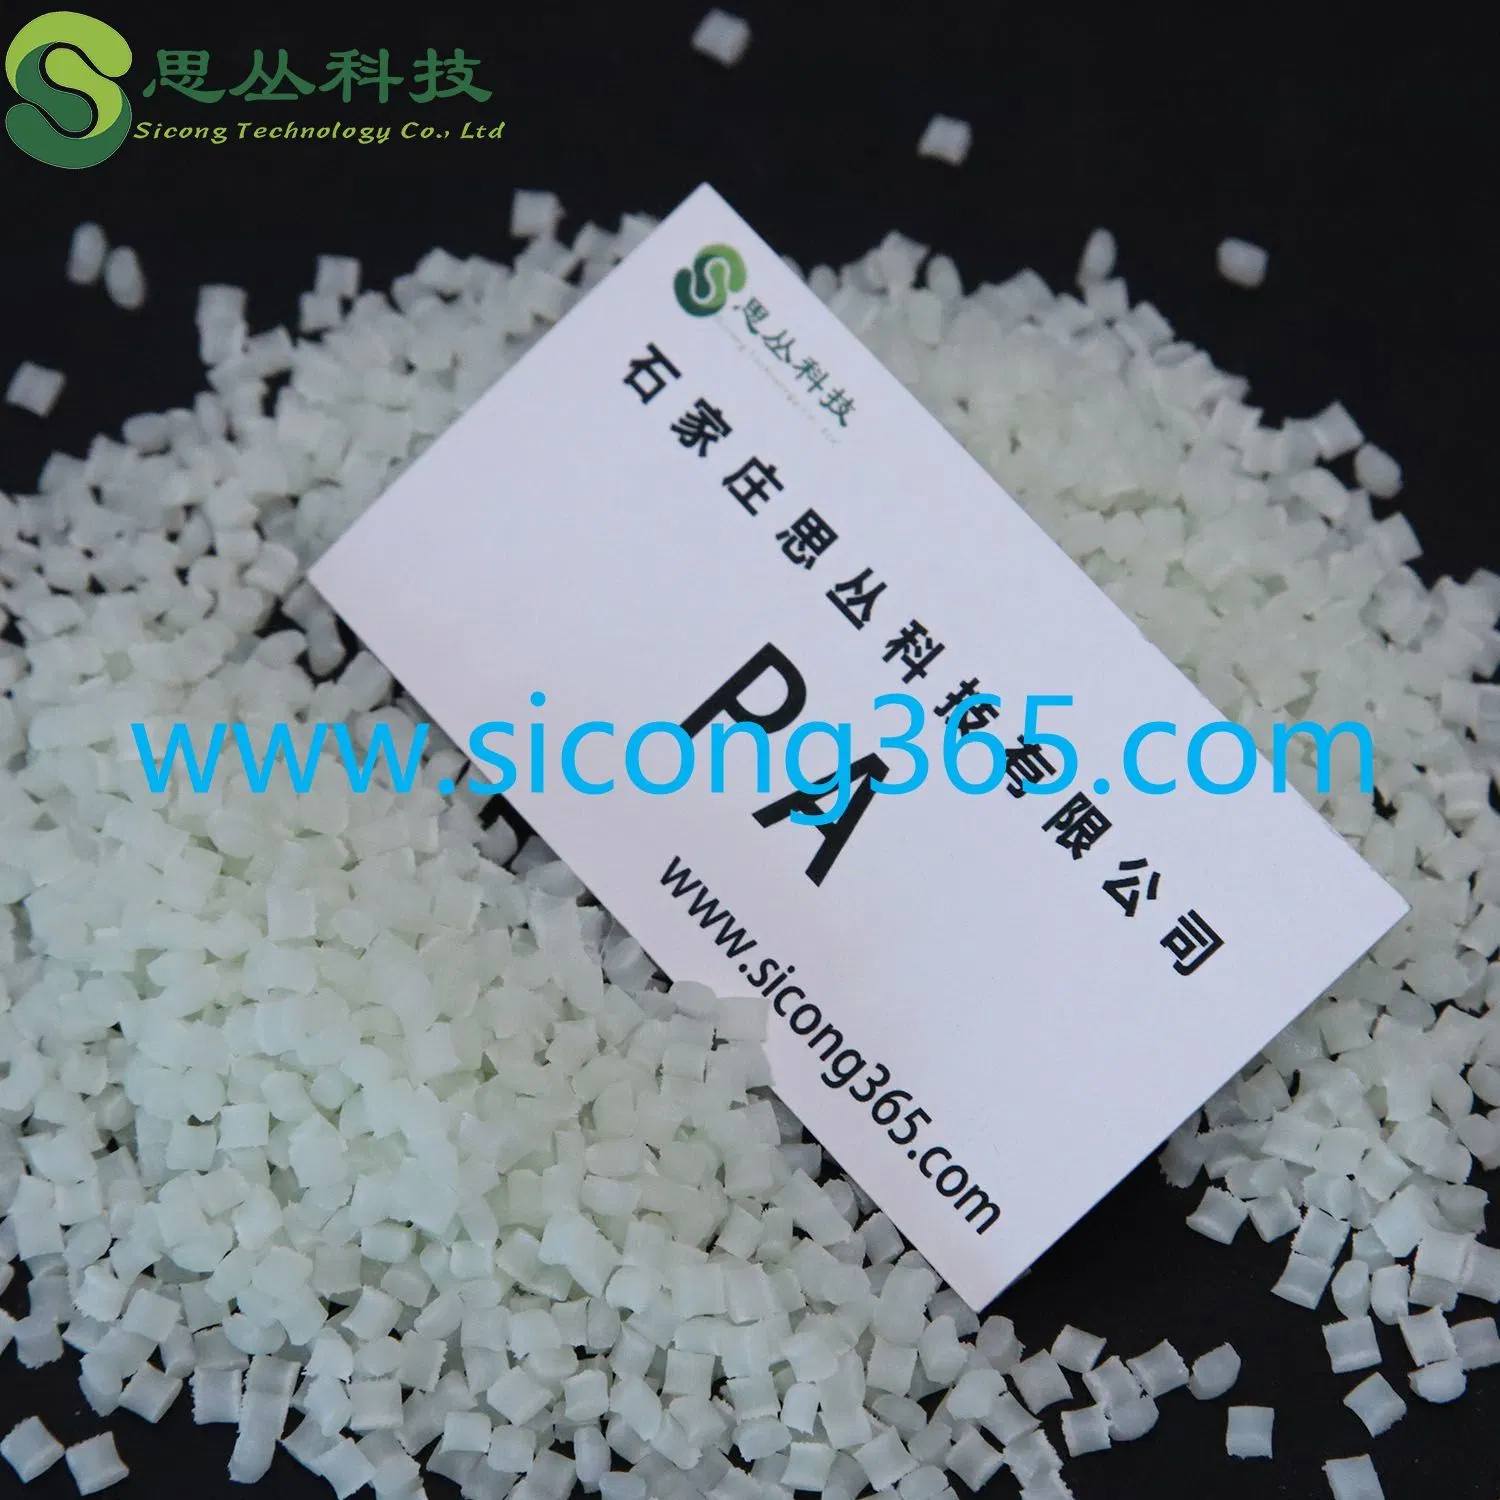 China Supplier Wholesale PA Polyamide Plastic Raw Material PA Resin PA with High Quality and Low Price